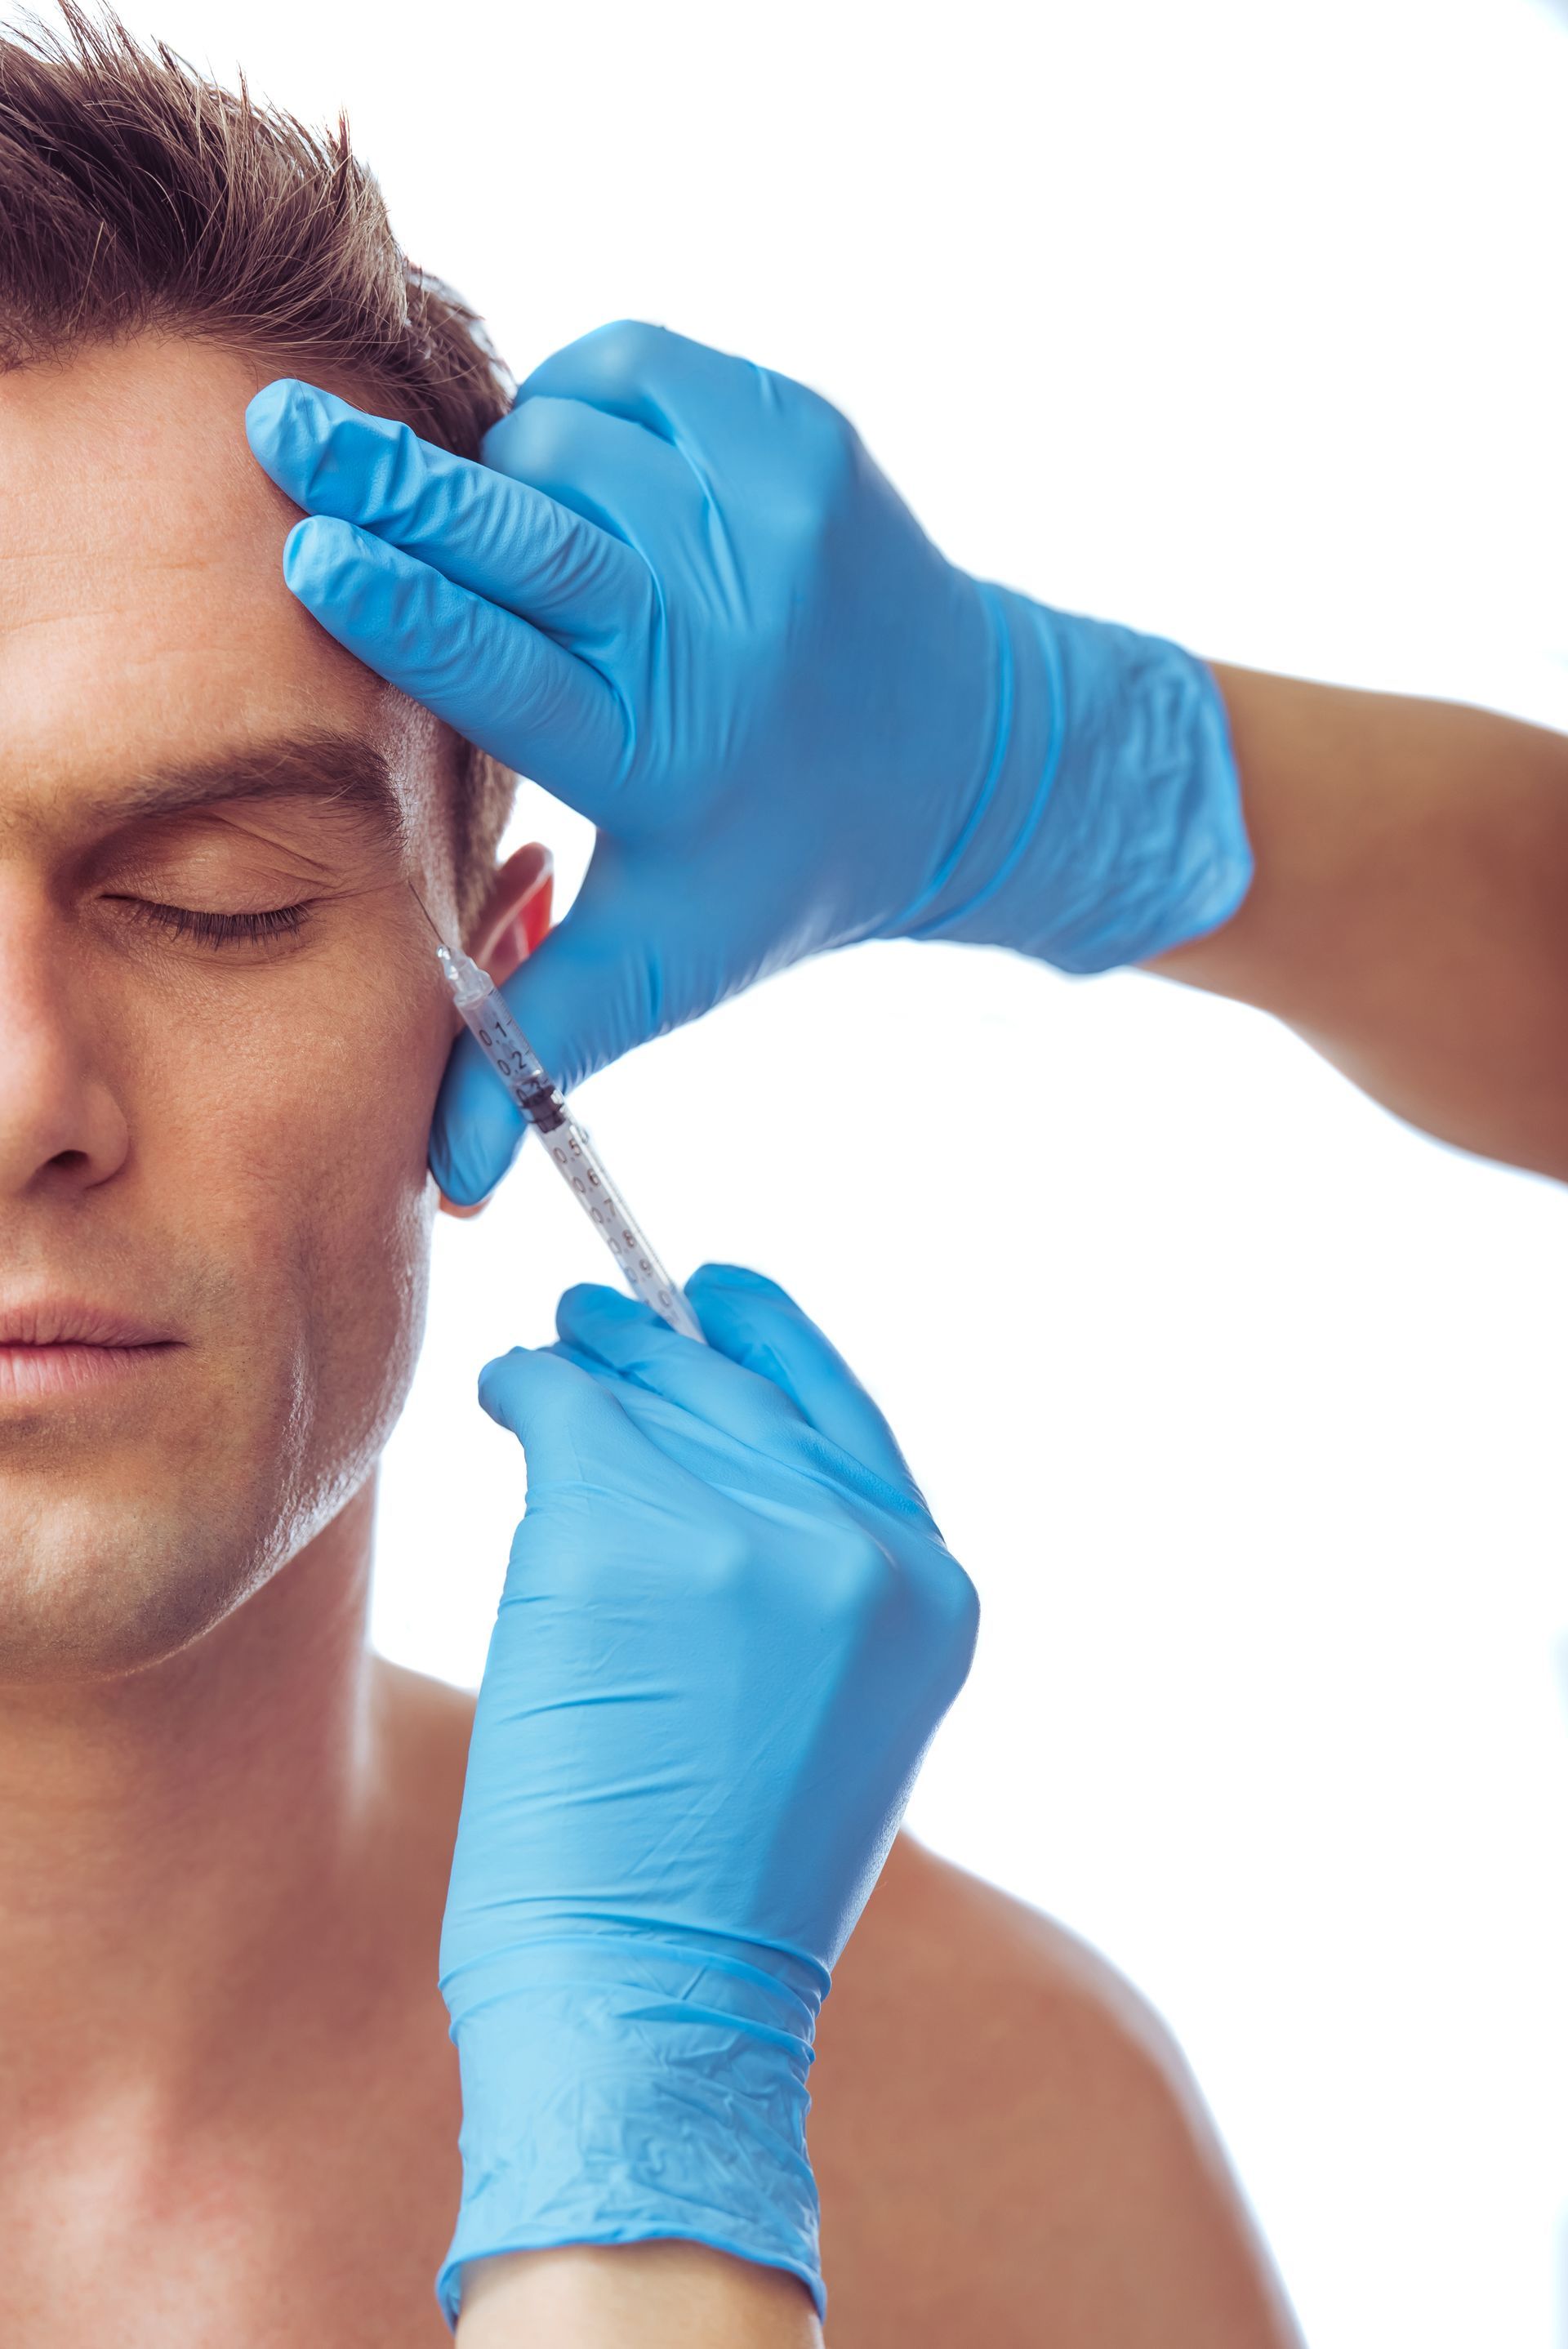 a man is getting a botox injection on his forehead